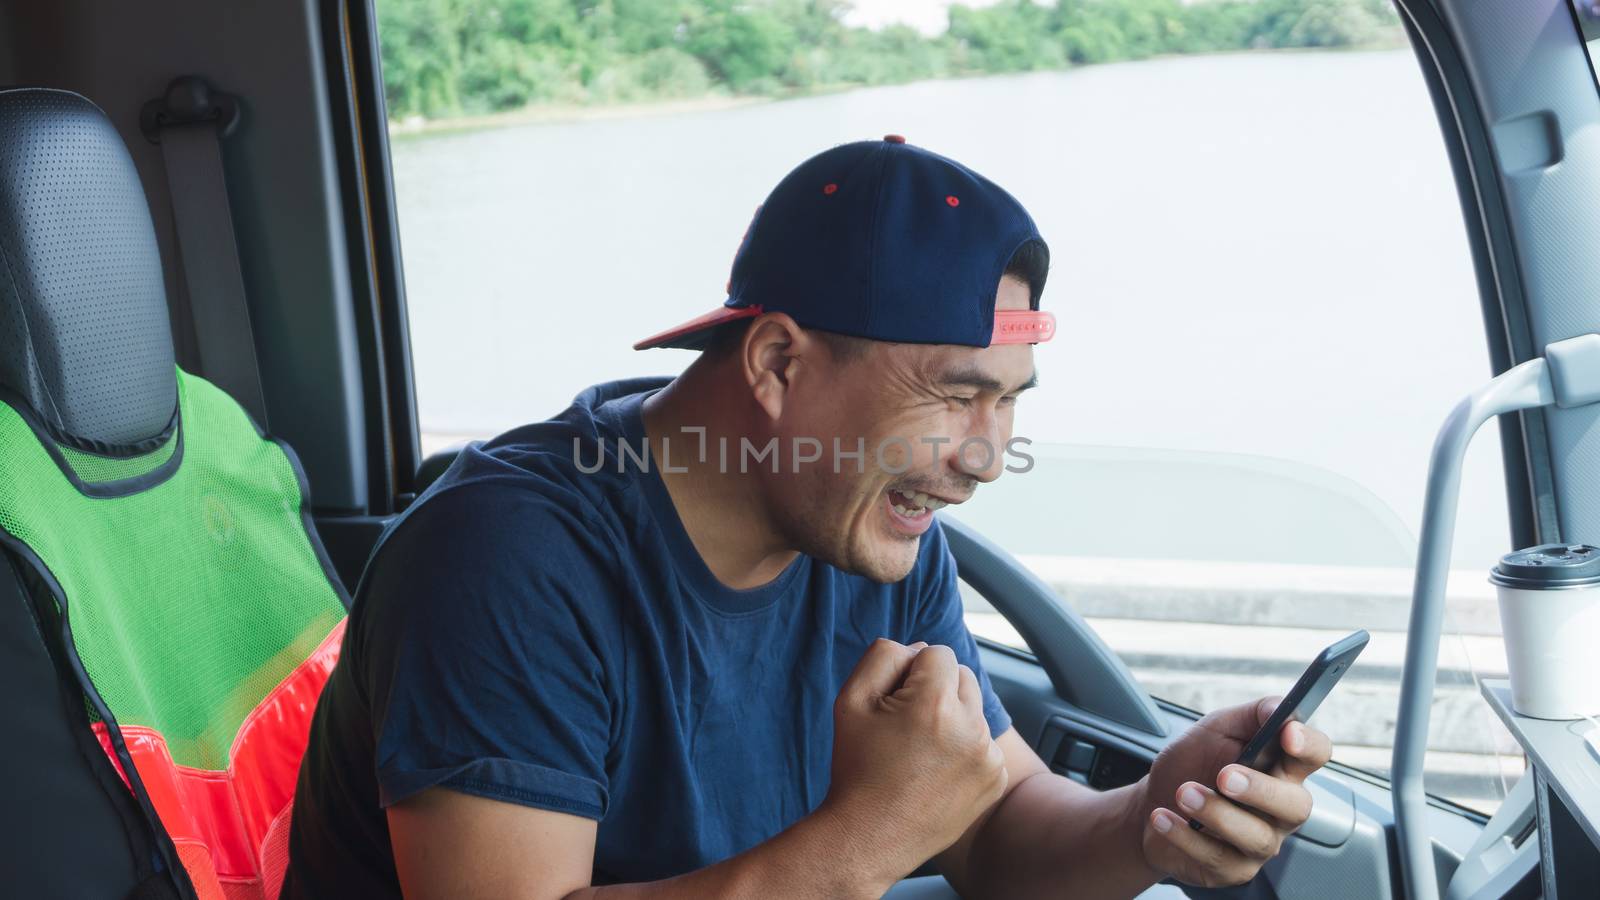 The truck driver is using a smartphone. by nuad338